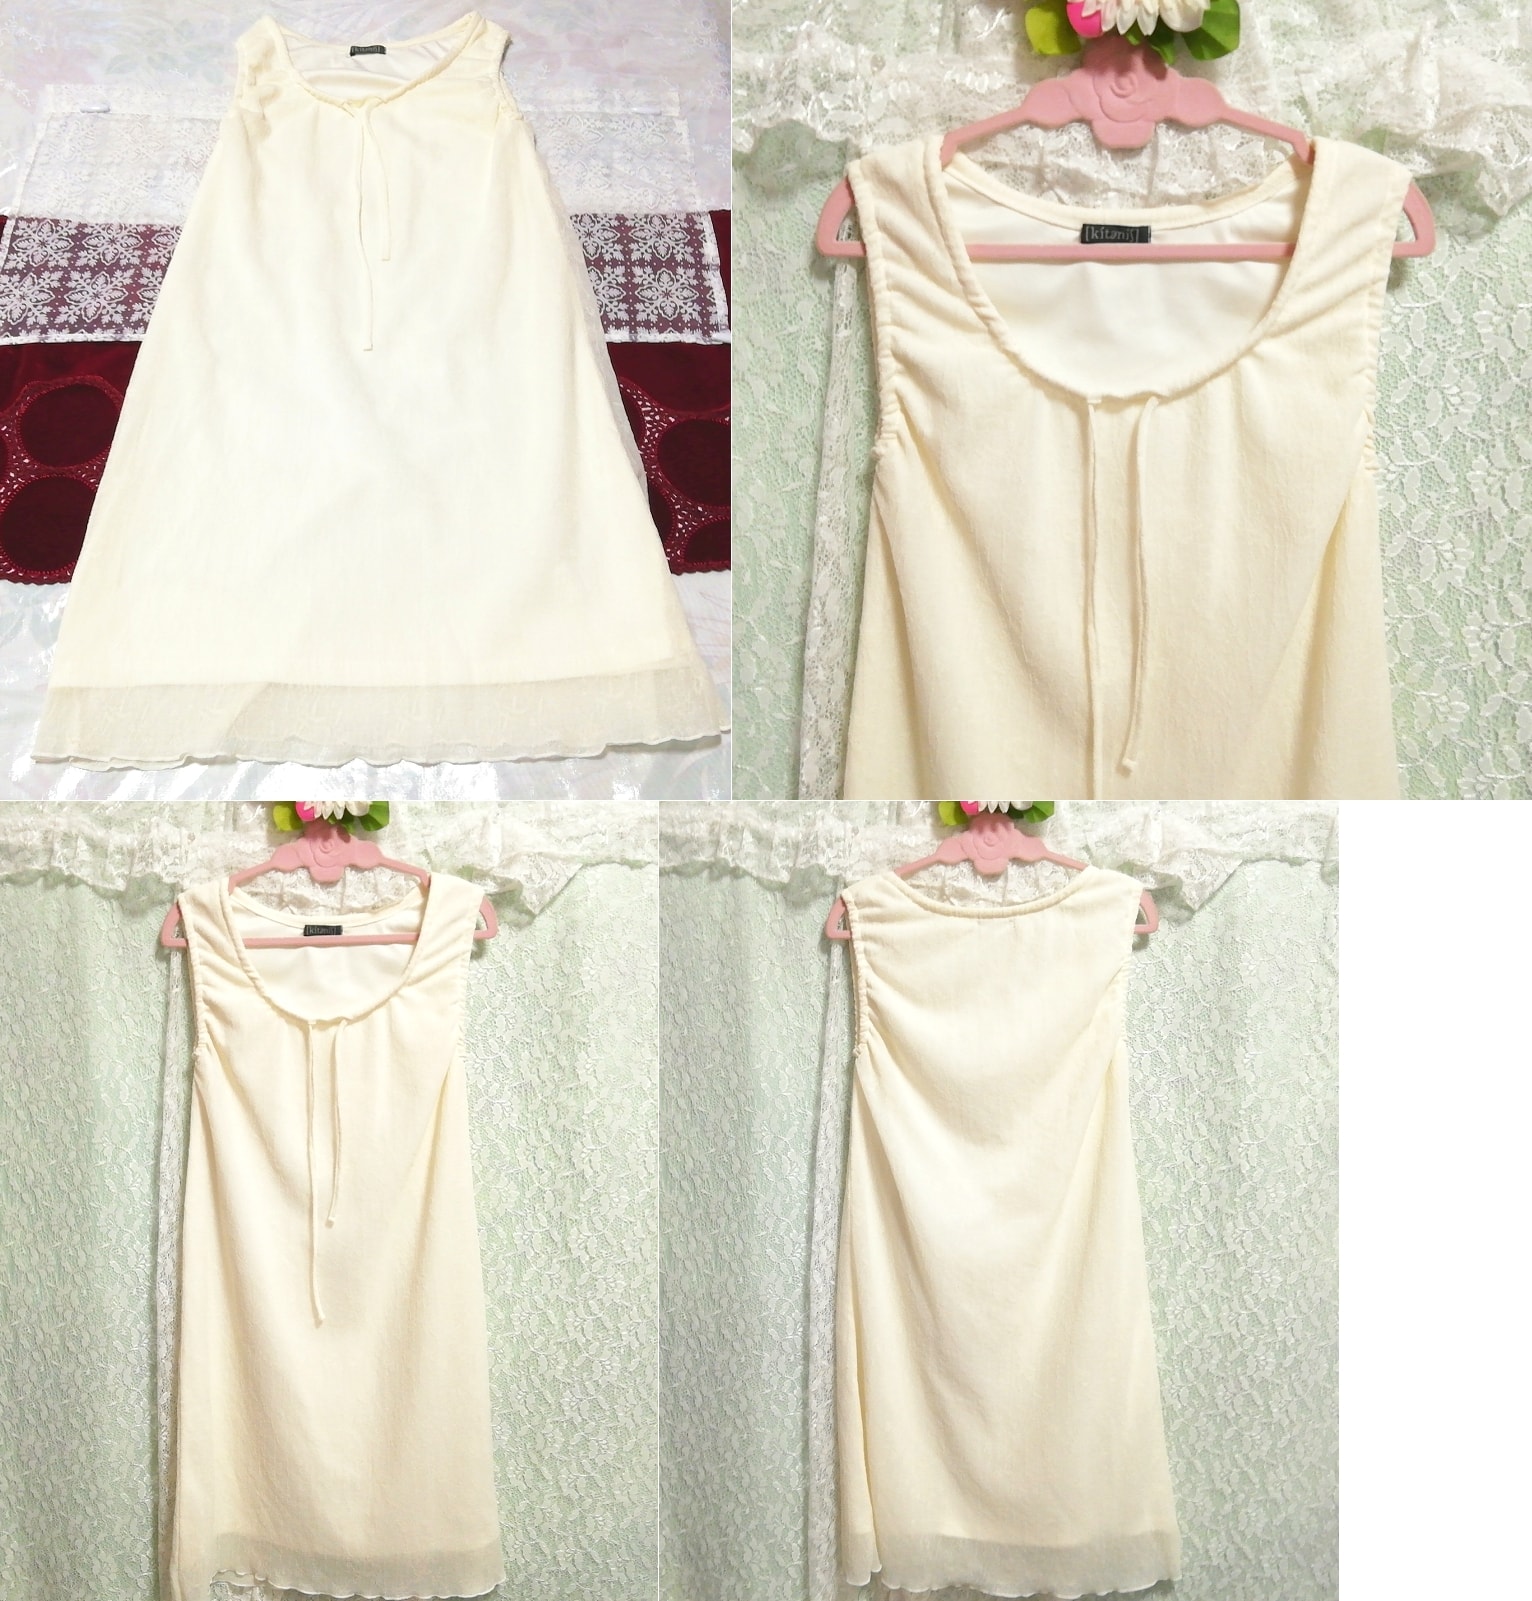 Floral white lace plain sleeveless negligee nightgown nightwear dress, knee length skirt, m size